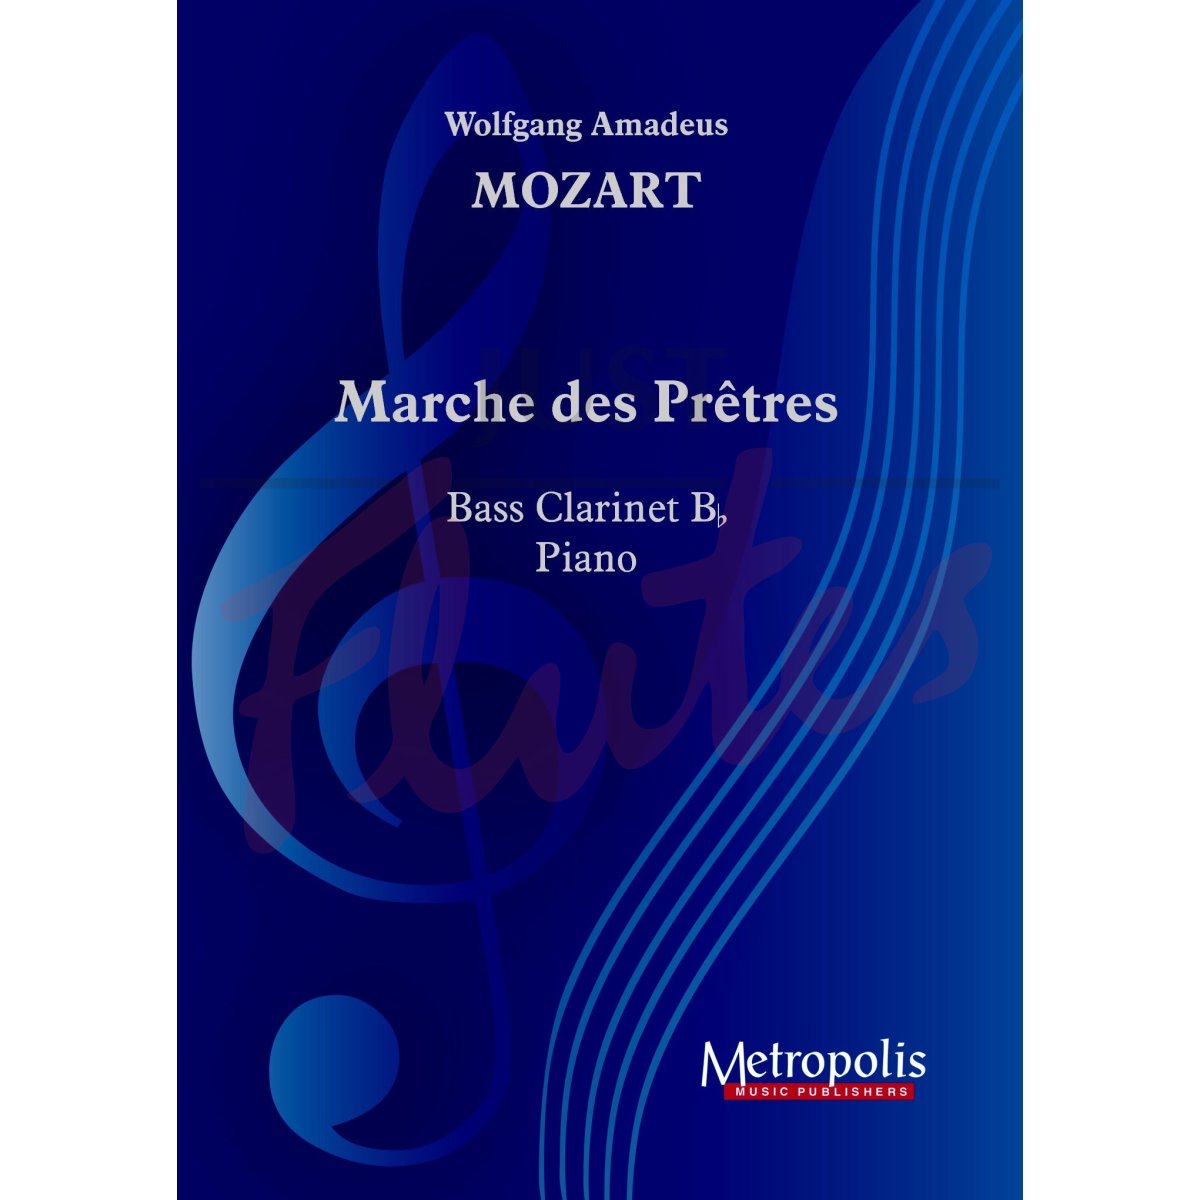 Marche des Prêtres for Bass Clarinet and Piano